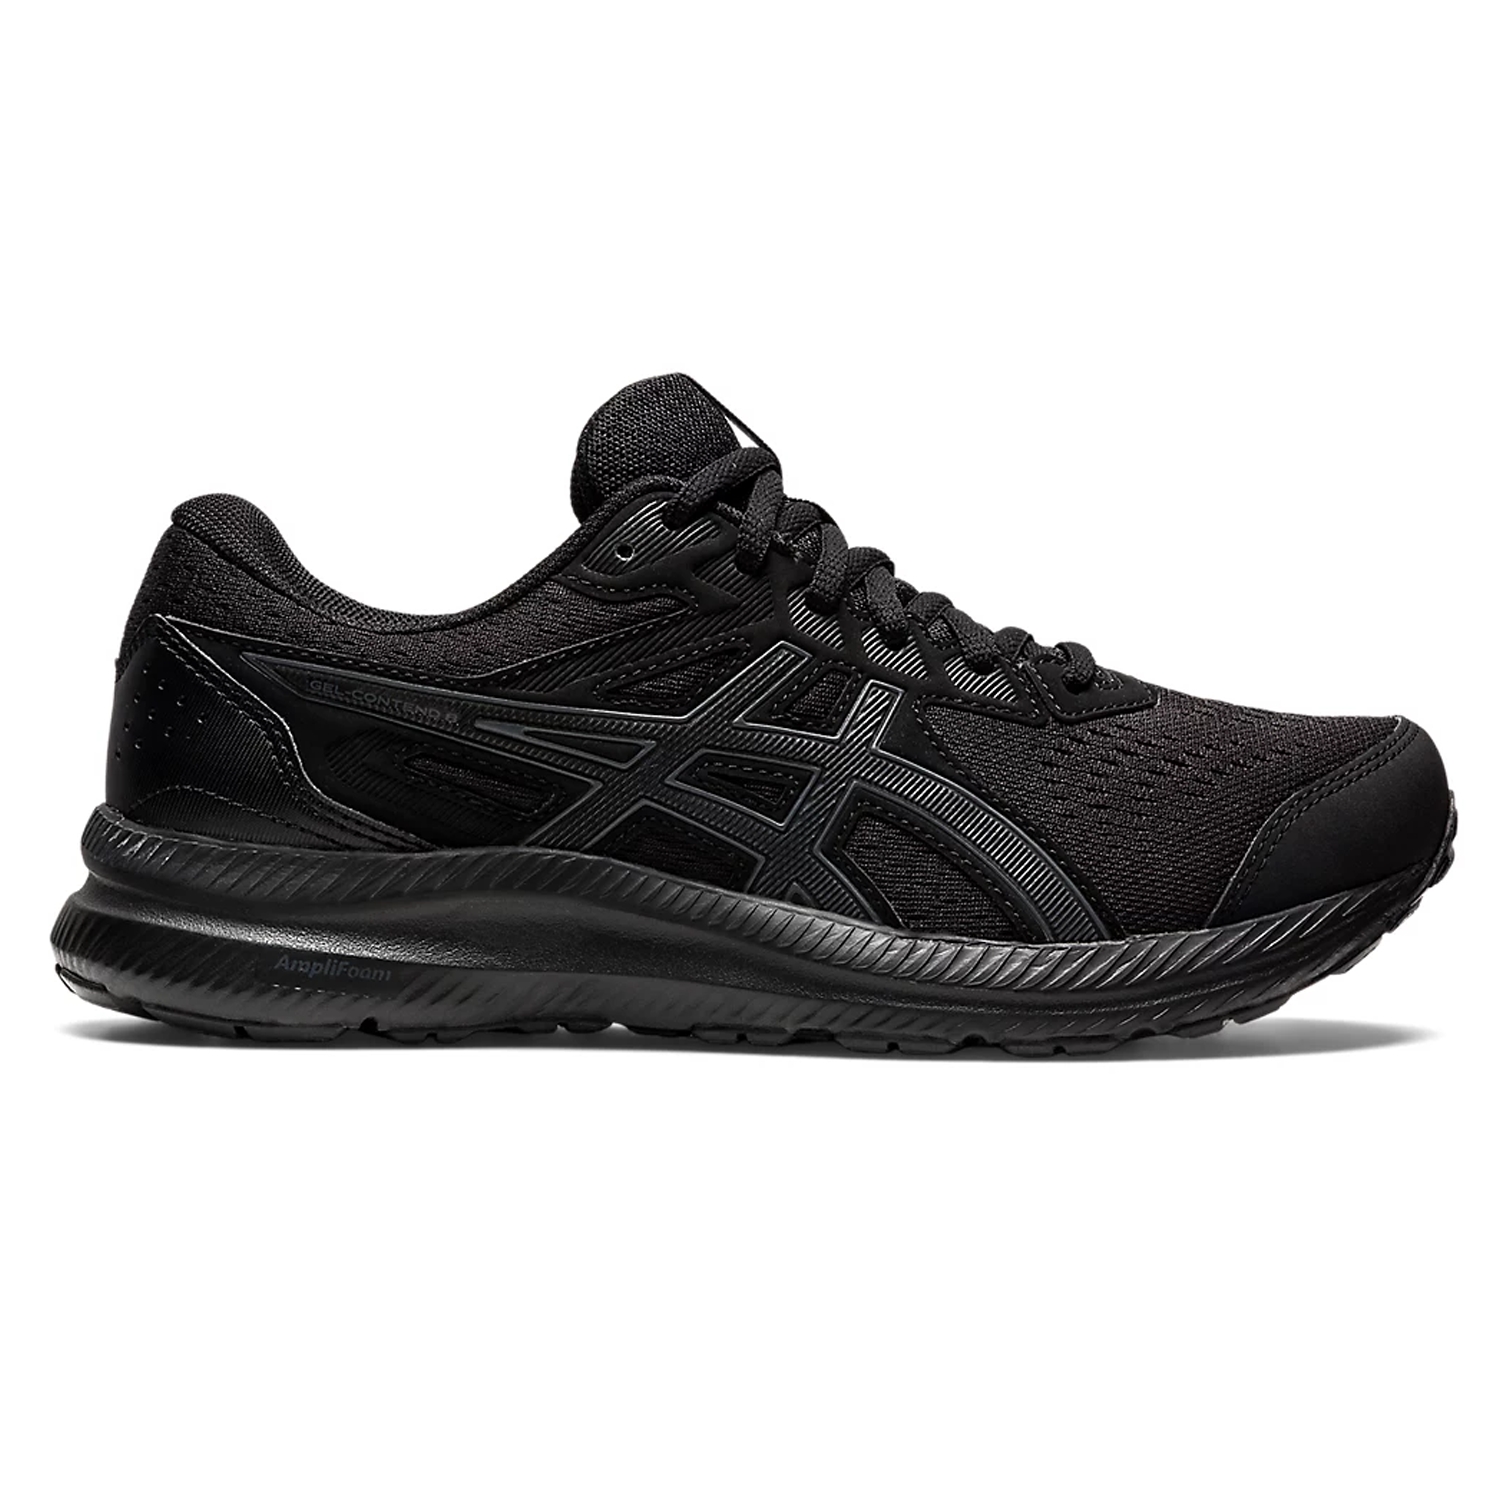 Asics Gel-Contend 8 Womens Running Shoes: Black/Carrier Grey | Mike ...